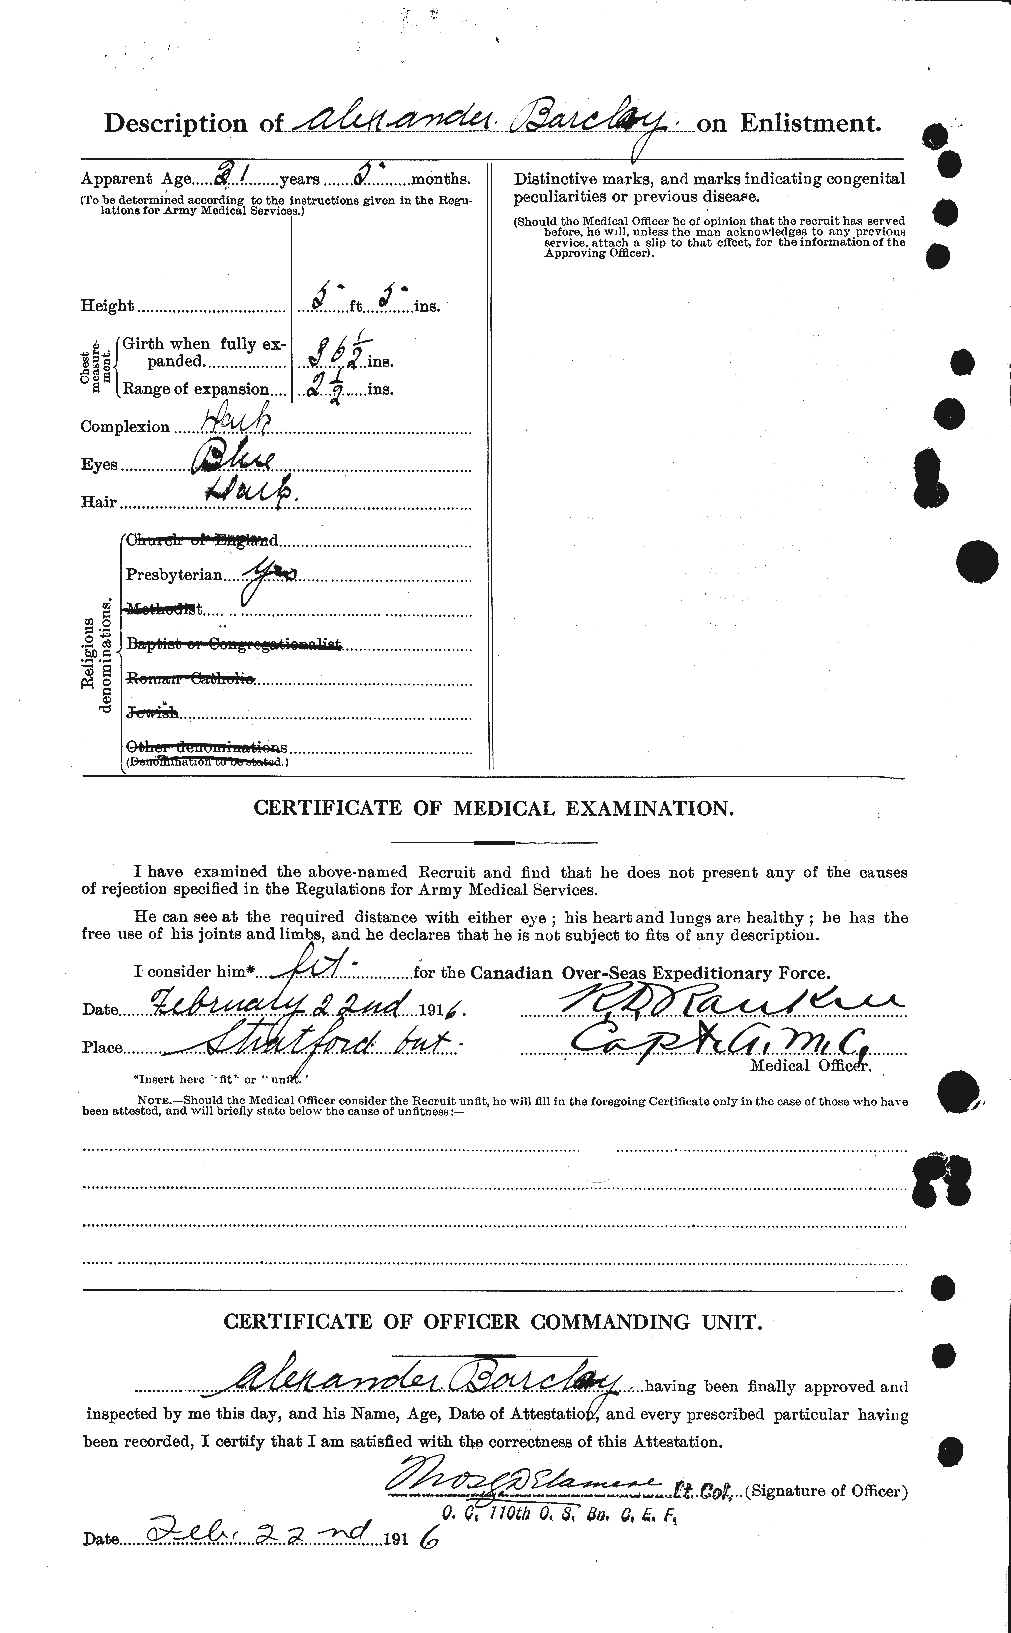 Personnel Records of the First World War - CEF 220968b